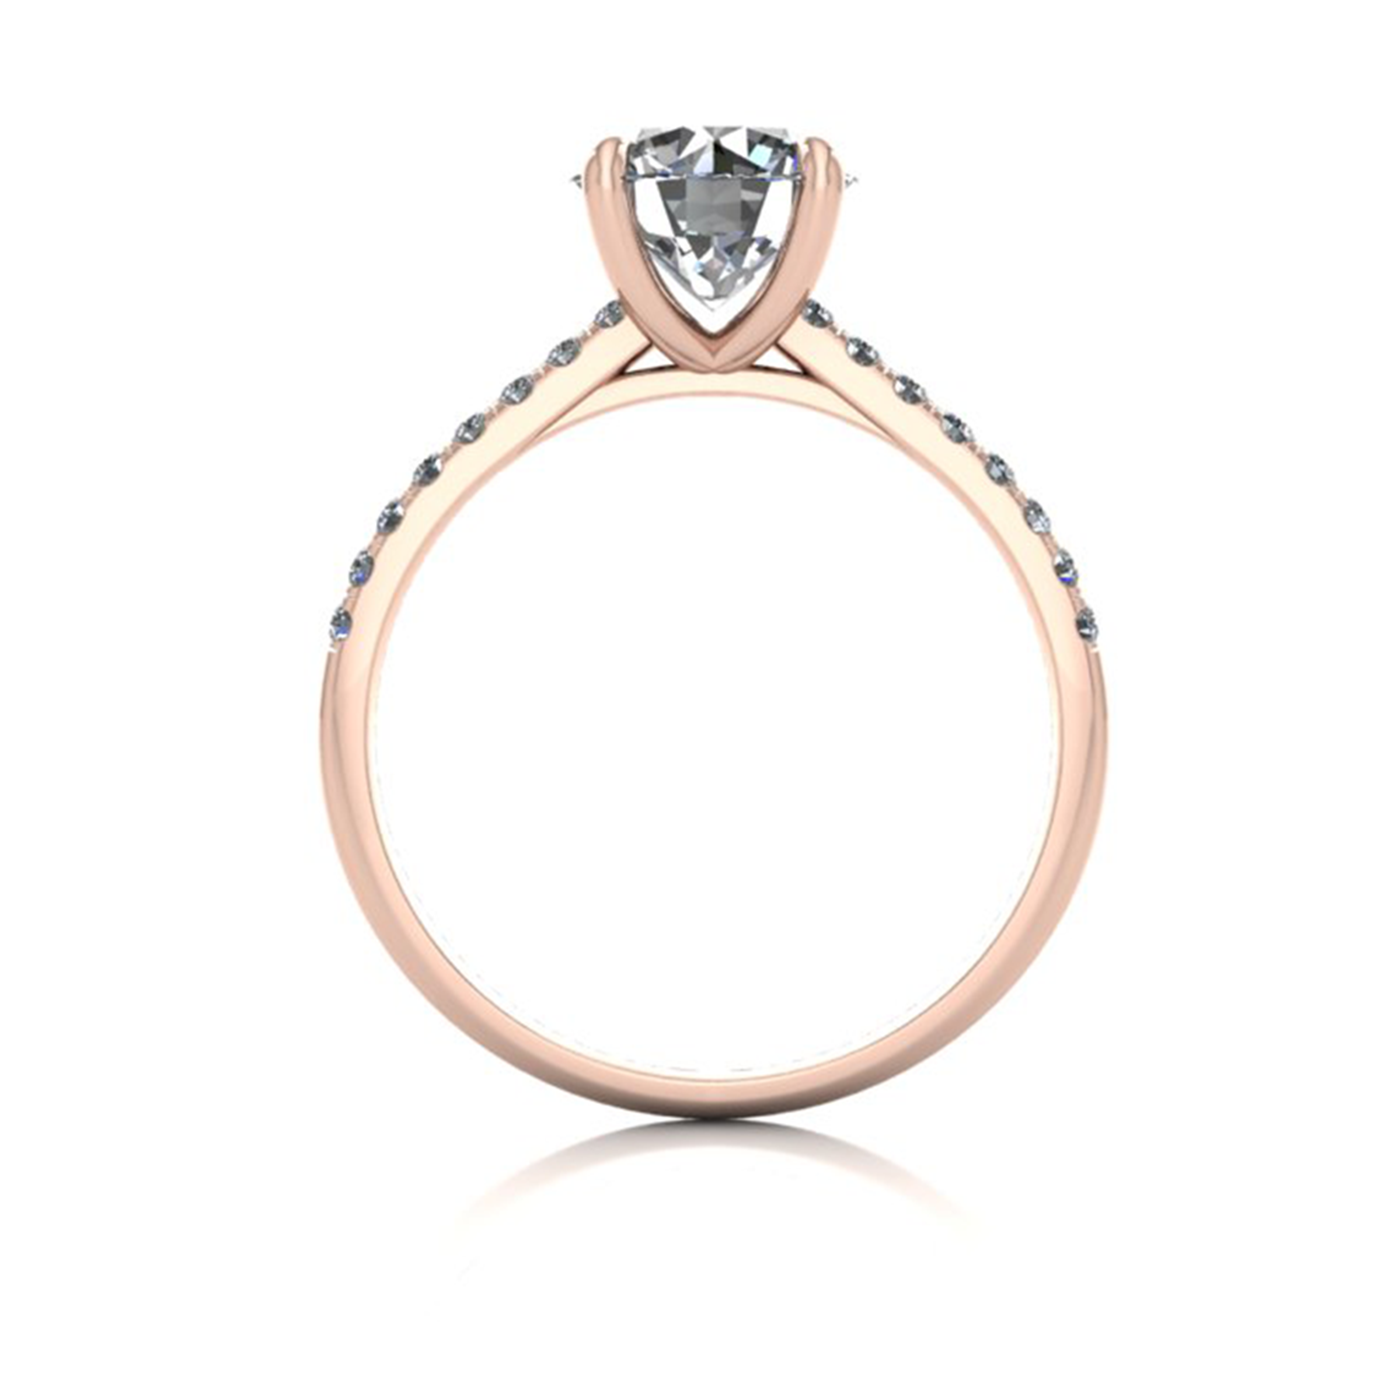 18k rose gold 1.5ct 4 prongs round cut diamond engagement ring with whisper thin pavÉ set band